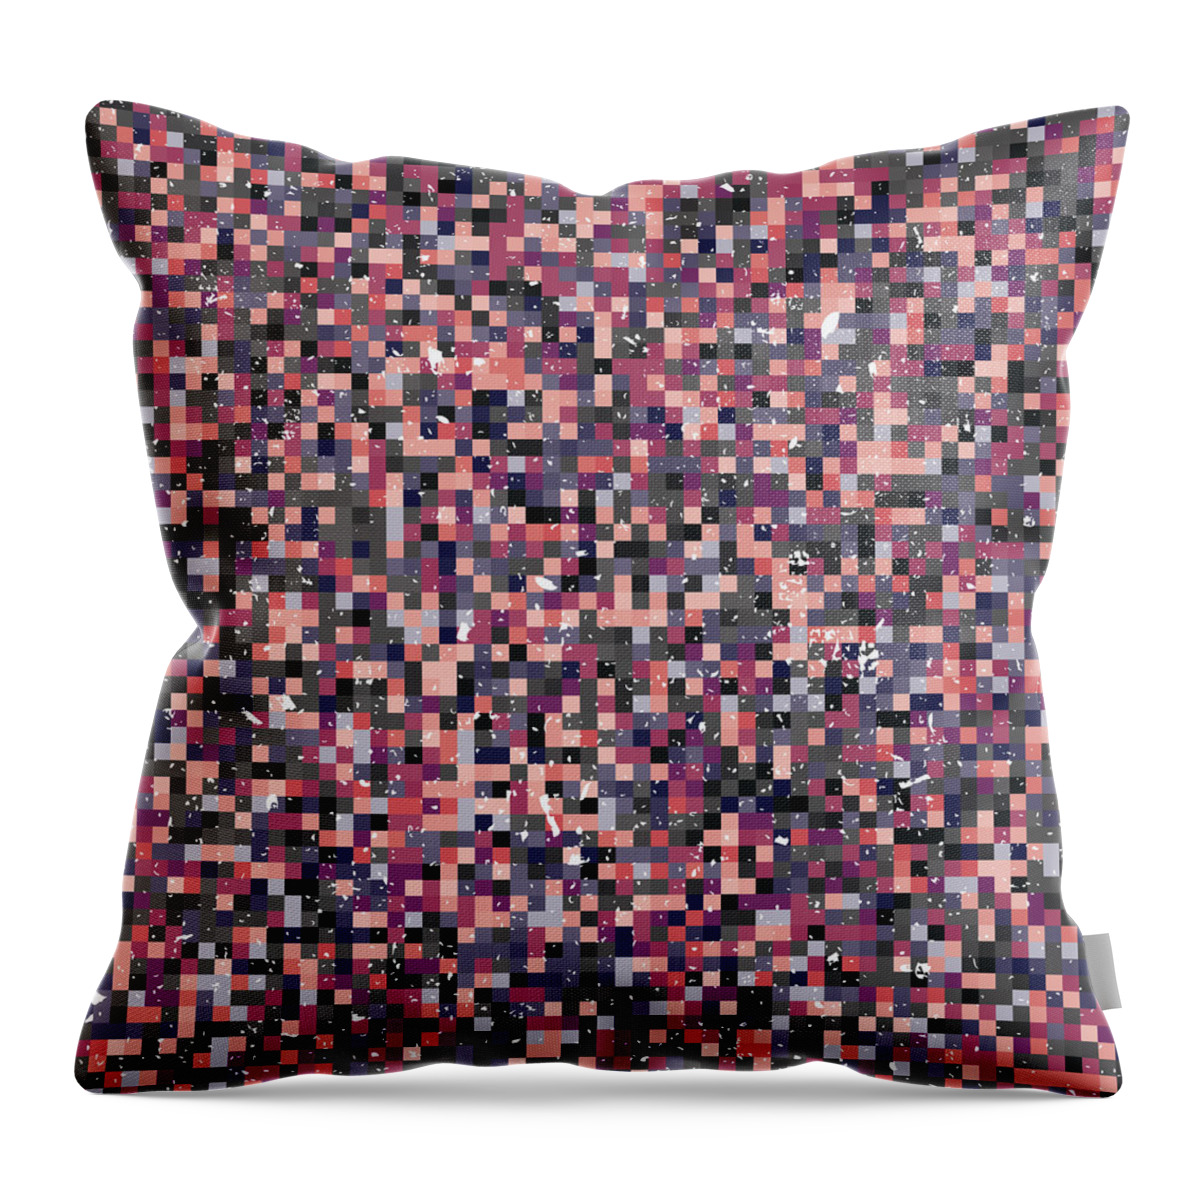 Wallpaper Throw Pillow featuring the digital art Pixel Art #111 by Mike Taylor